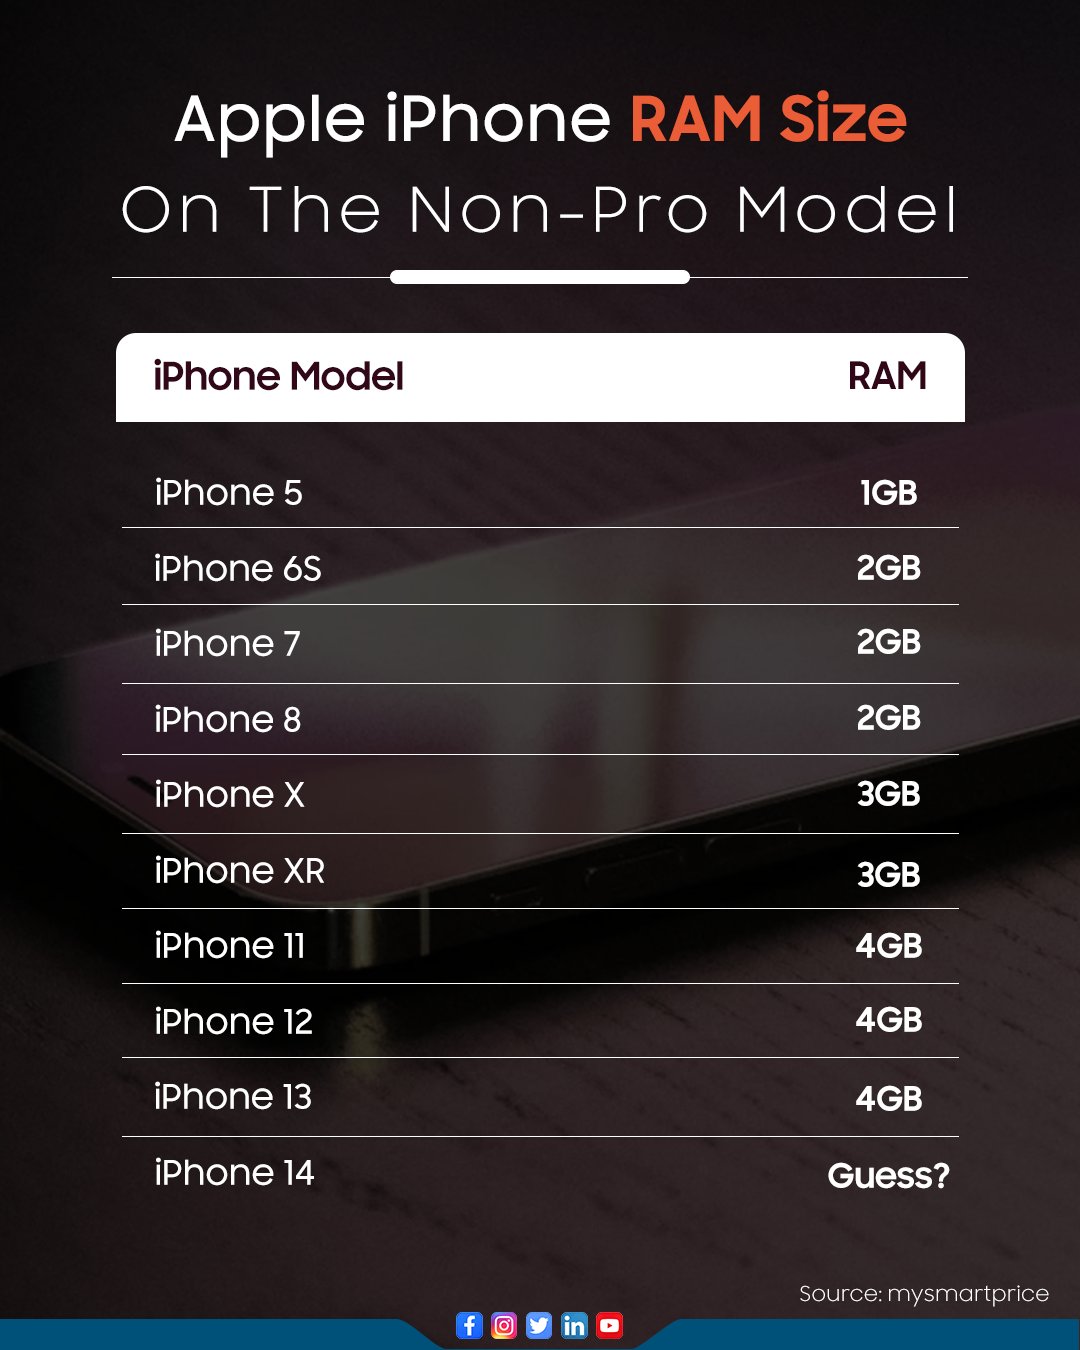 klippe kirurg vores GizNext on Twitter: "Here's how Apple has upgraded the RAM capacity over  the years. Can you guess the RAM capacity of iPhone14? @TheAppleRumours  #apple #iphone #iphonemodel #ramsize #ram #appleuser #iphoneuser  #nonpromodel #iphone14 #